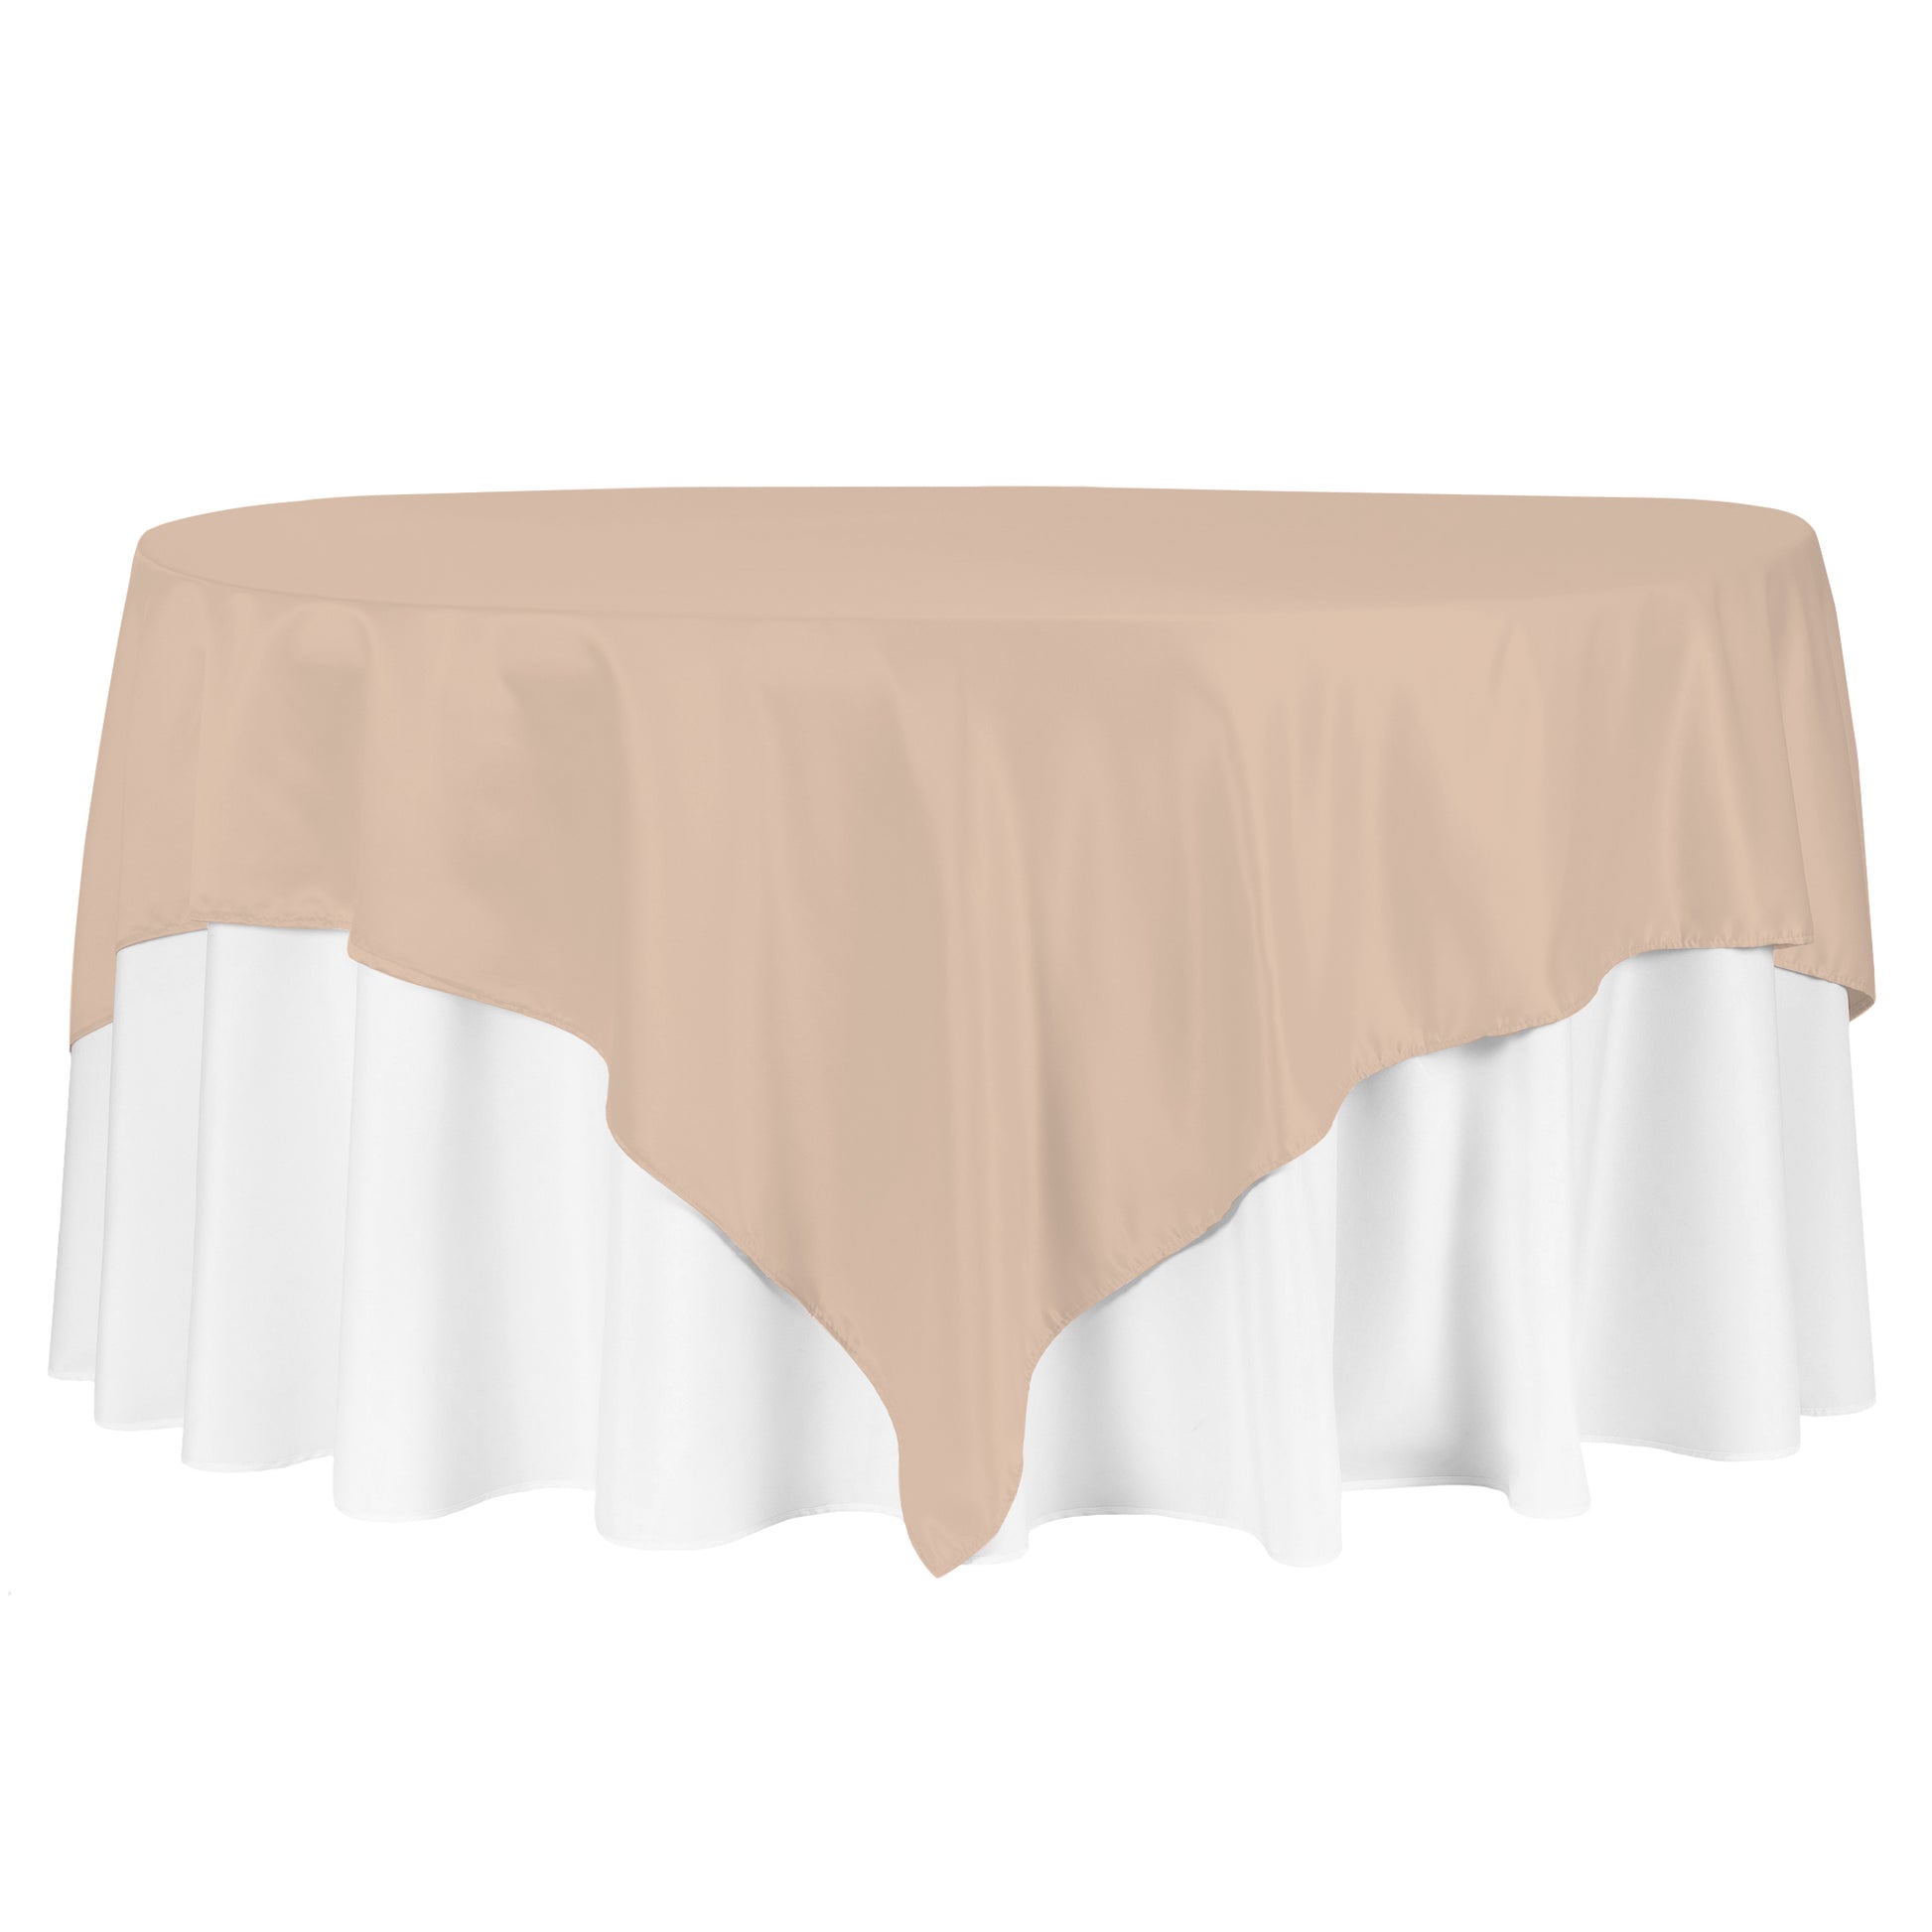 Square 90"x90" Lamour Satin Table Overlay - Champagne